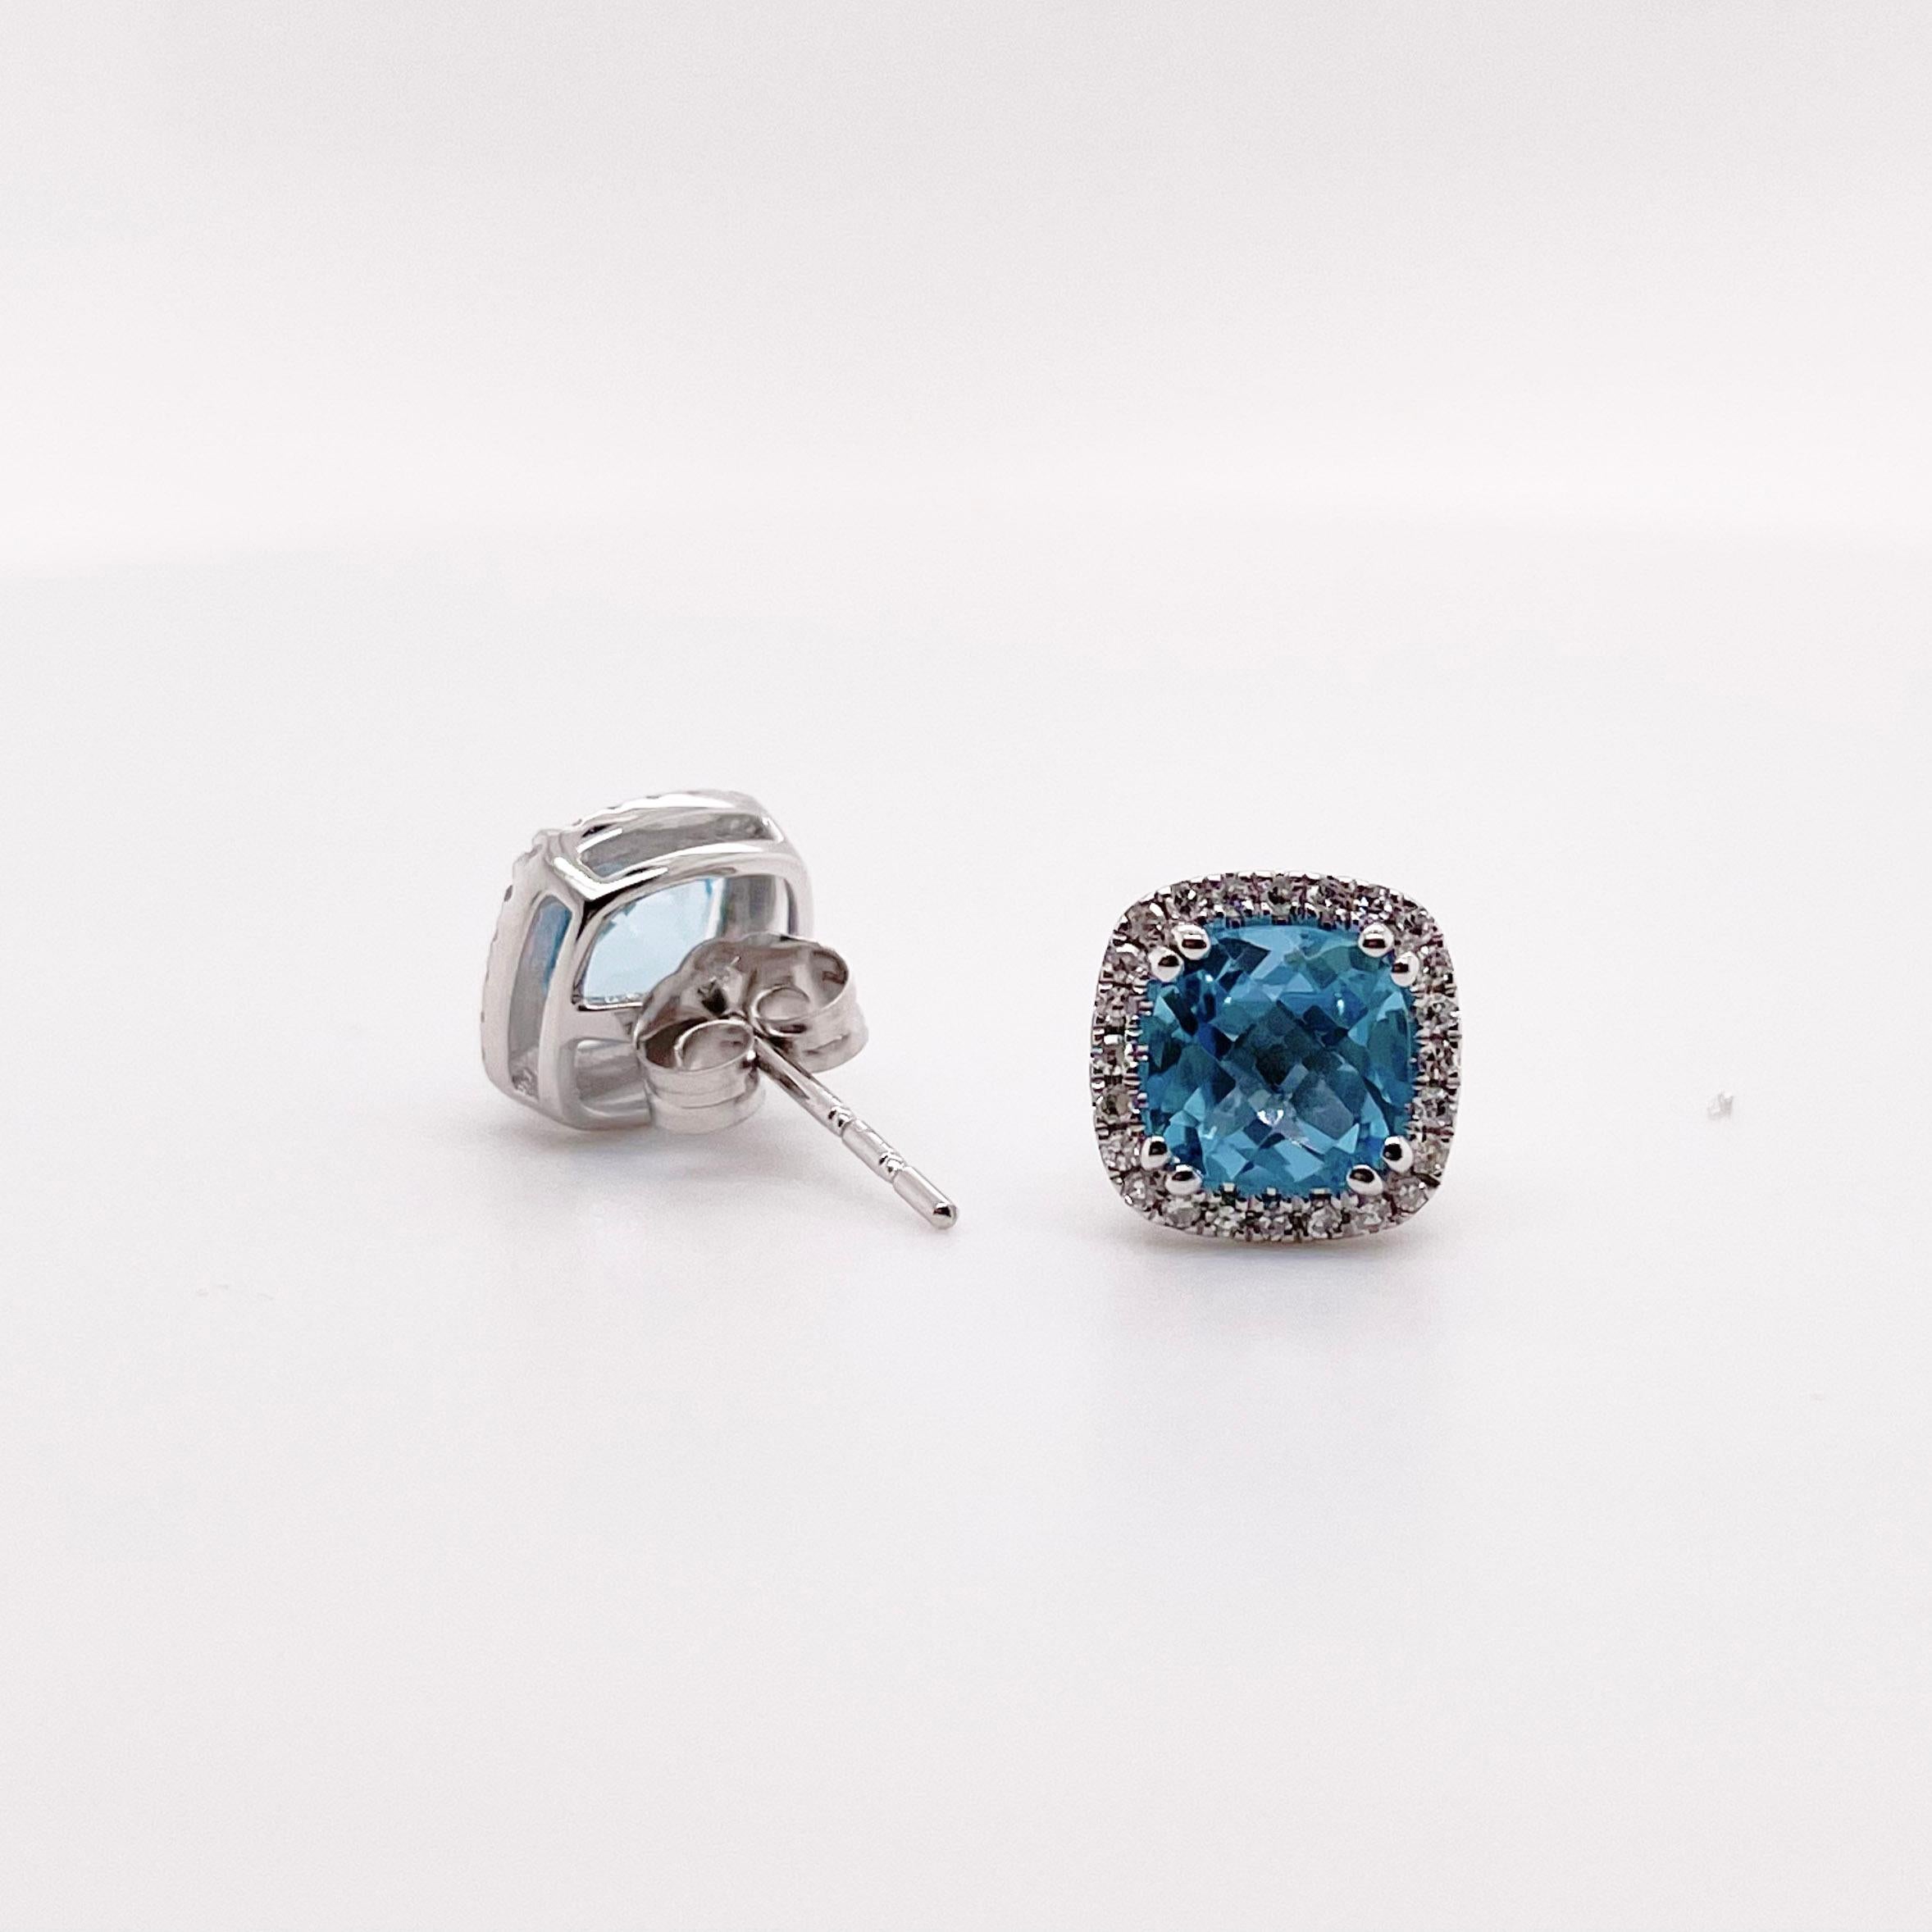 These gorgeous Swiss blue topaz earrings are accented with a halo of diamonds.  These earrings are the perfect size to wear everyday! Swiss blue is the most popular color for topaz as it is a nice pop of color with anyone’s hair! Each earring has 24